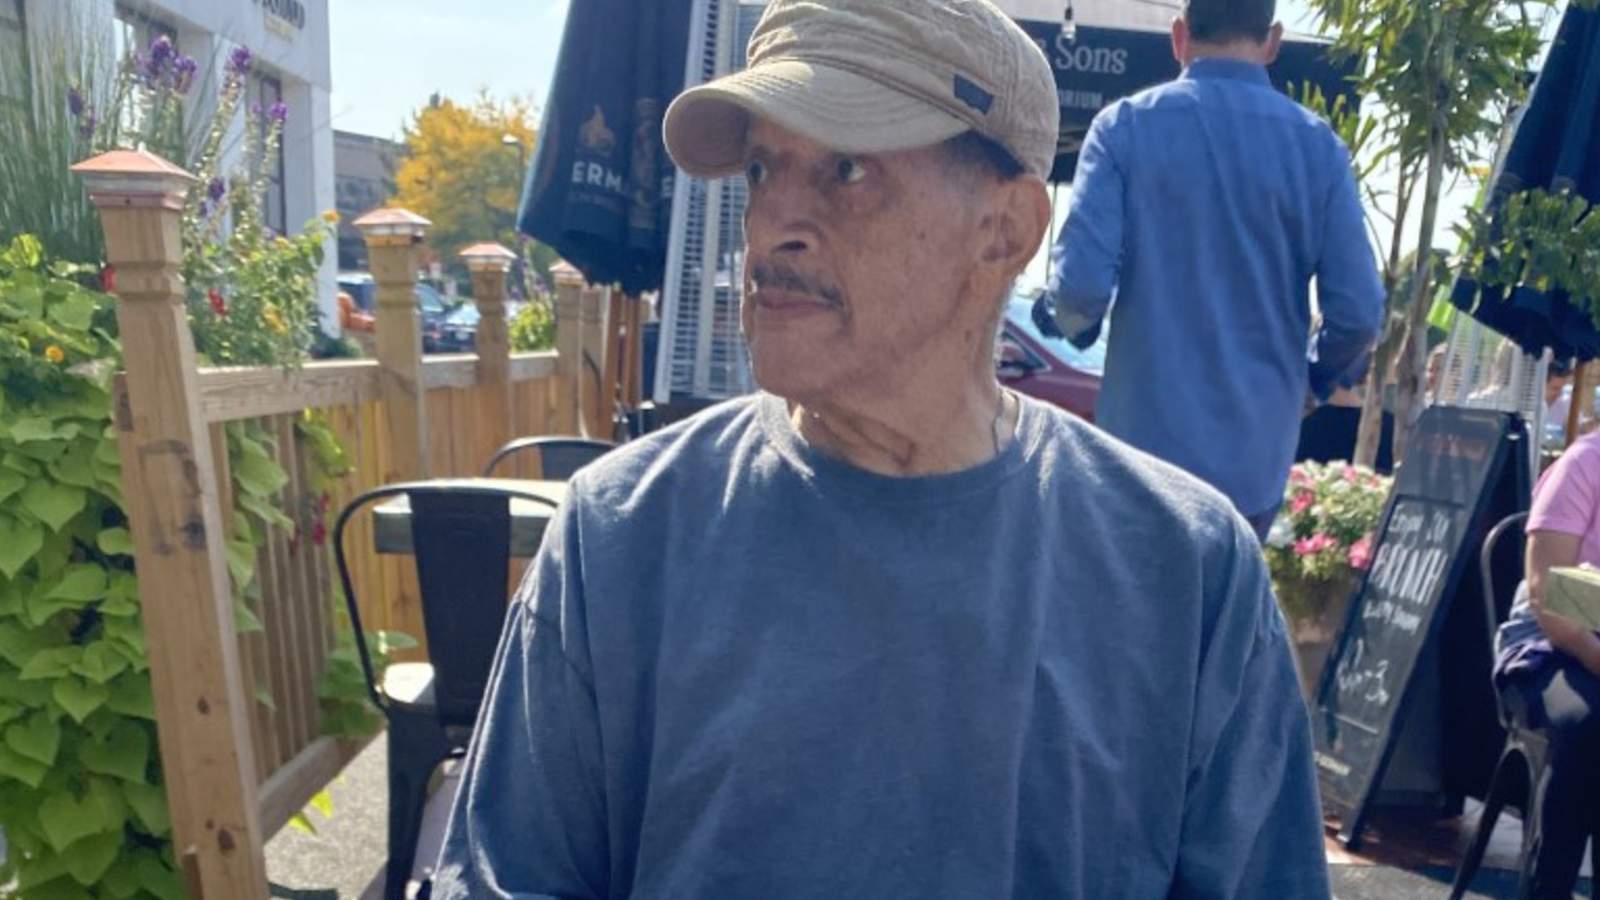 Redford Township police looking for missing 83-year-old man who walked away from home